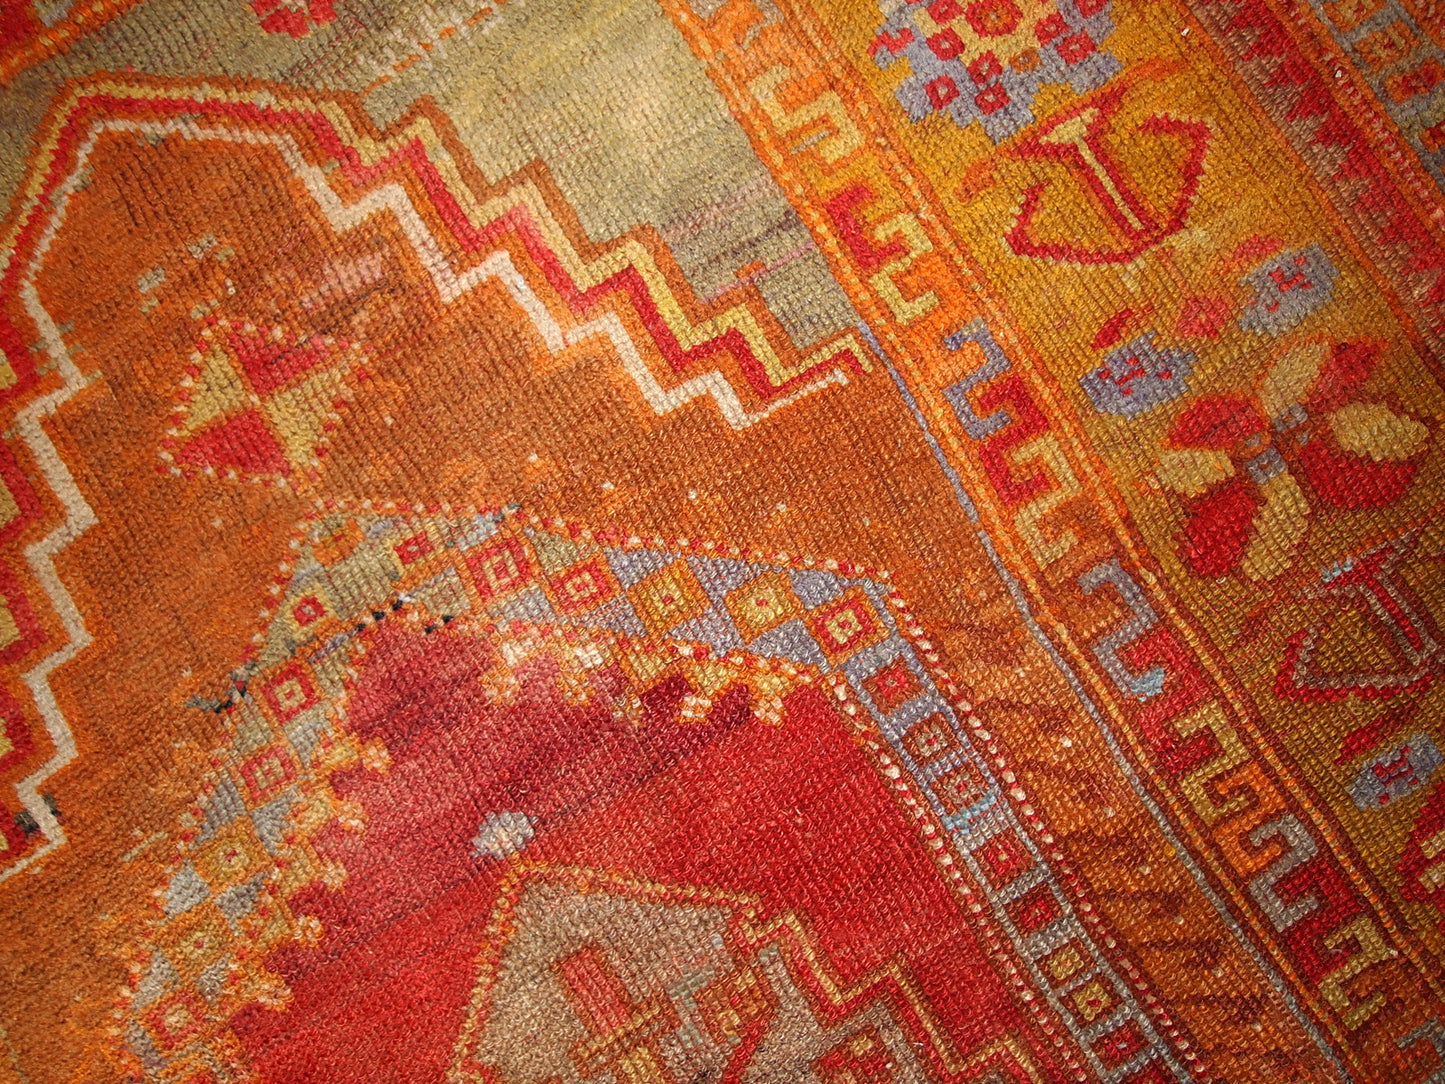 Antique Turkish Anatolian rug in soft tones of green, orange, red and brown.  The rug is from the beginning of 20th century and in original good condition.